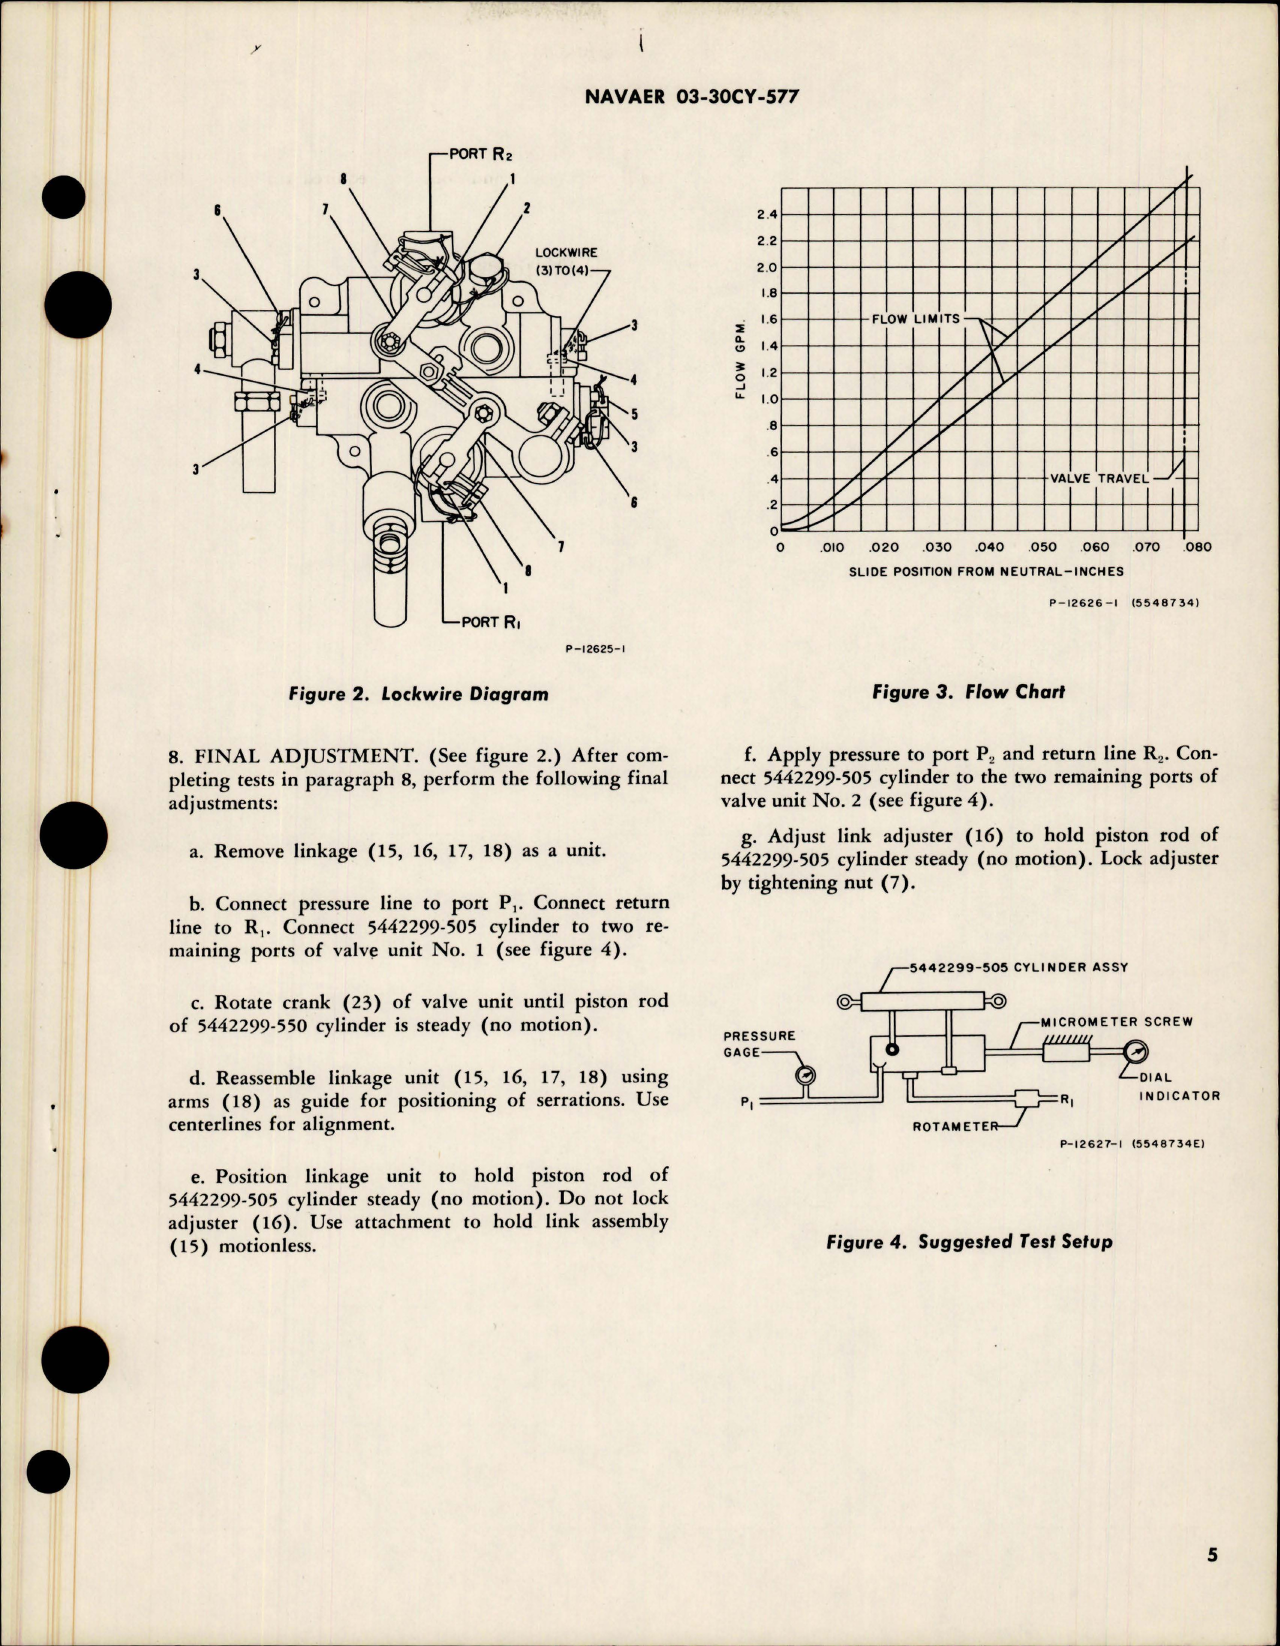 Sample page 5 from AirCorps Library document: Overhaul Instructions with Parts Breakdown for Aileron Surface Control Valve Assembly - 5548734, 5548734-501 